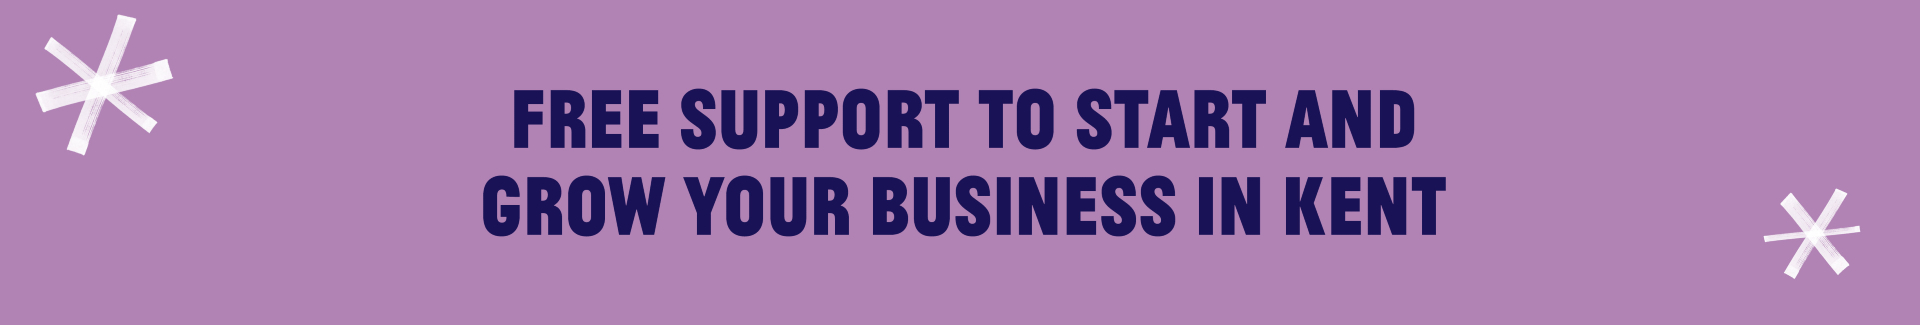 Free support to start and grow your business in Kent